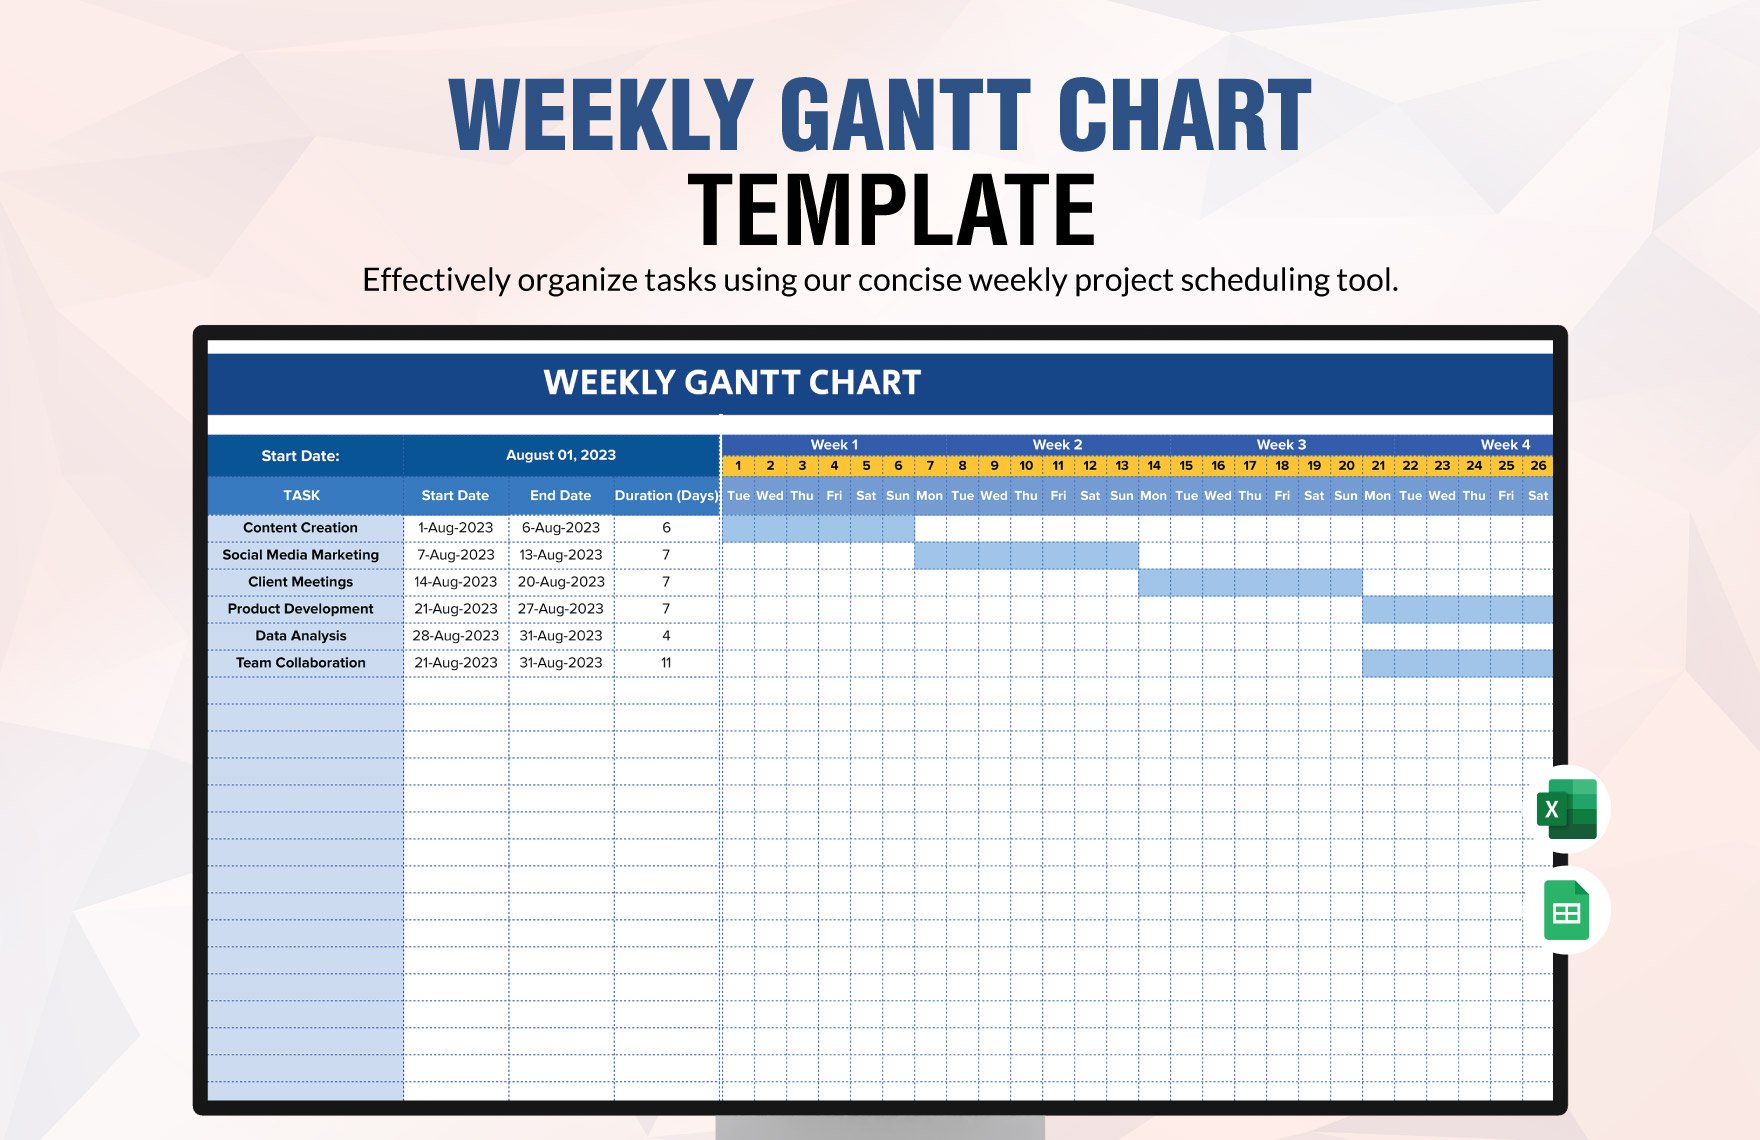 Weekly Gantt Chart Template in Excel, Google Sheets